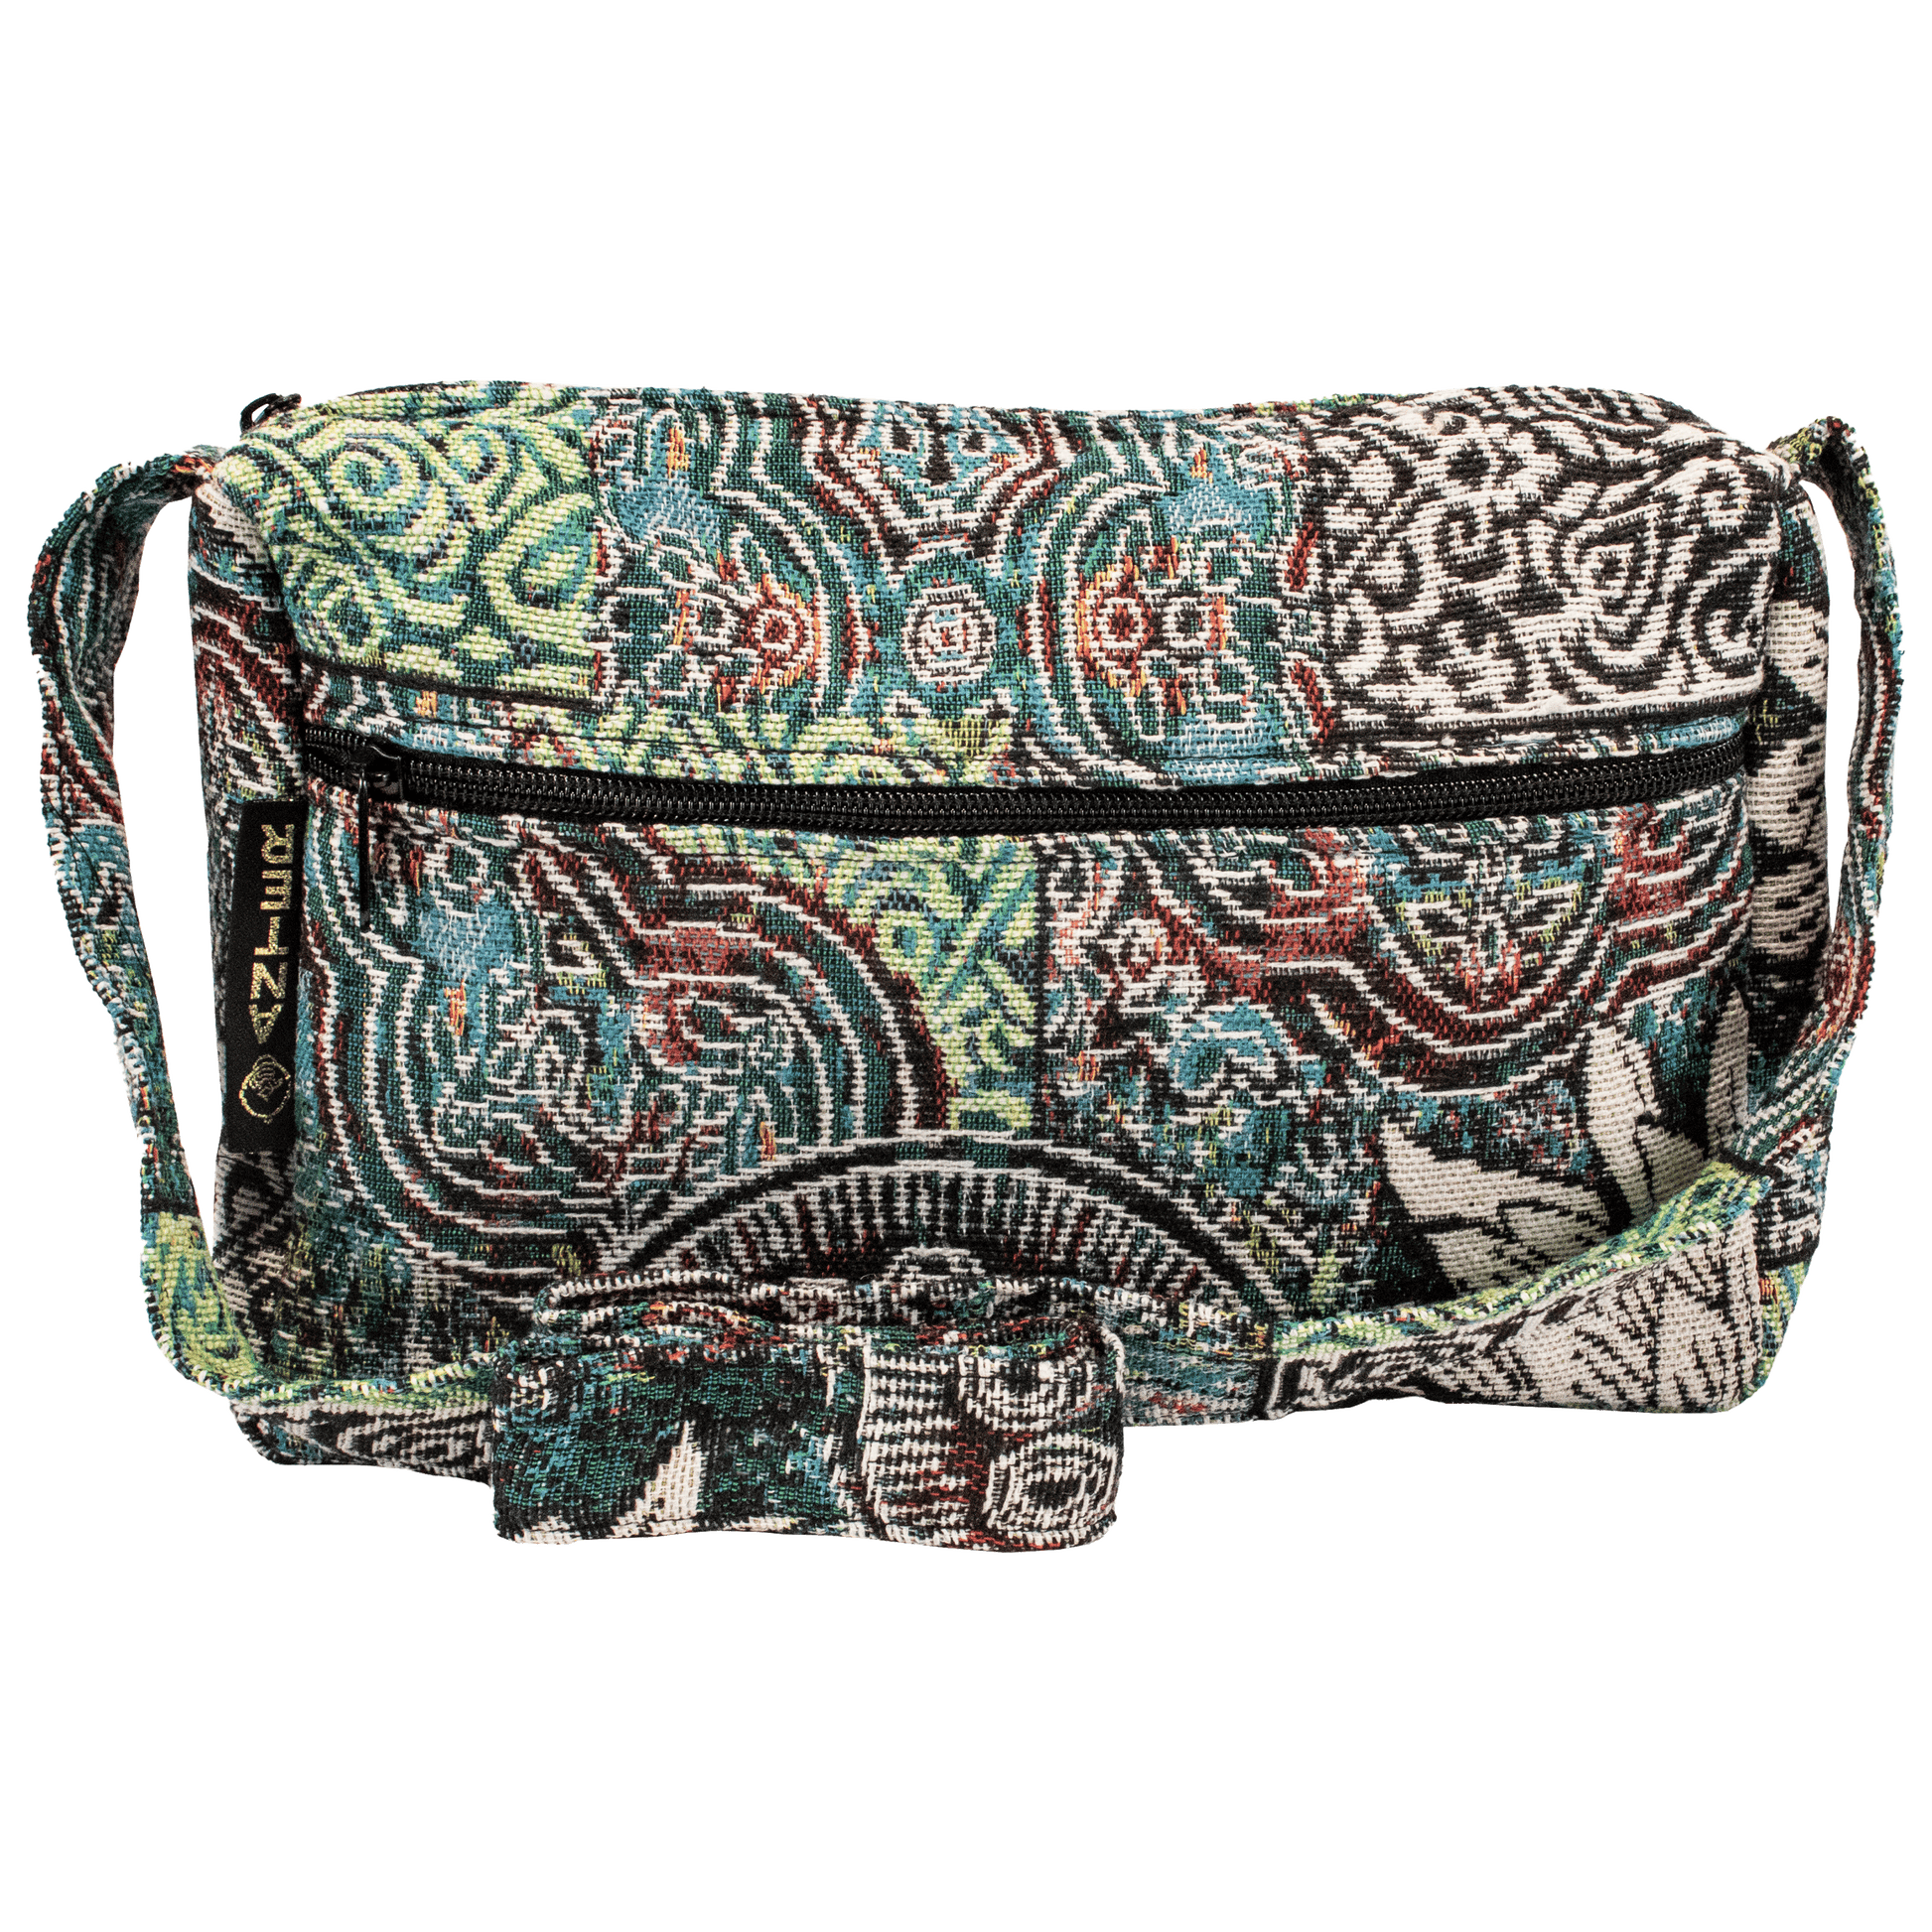 Medium Crossbody or shoulder purse green tones and red with floral and multi-design pattern